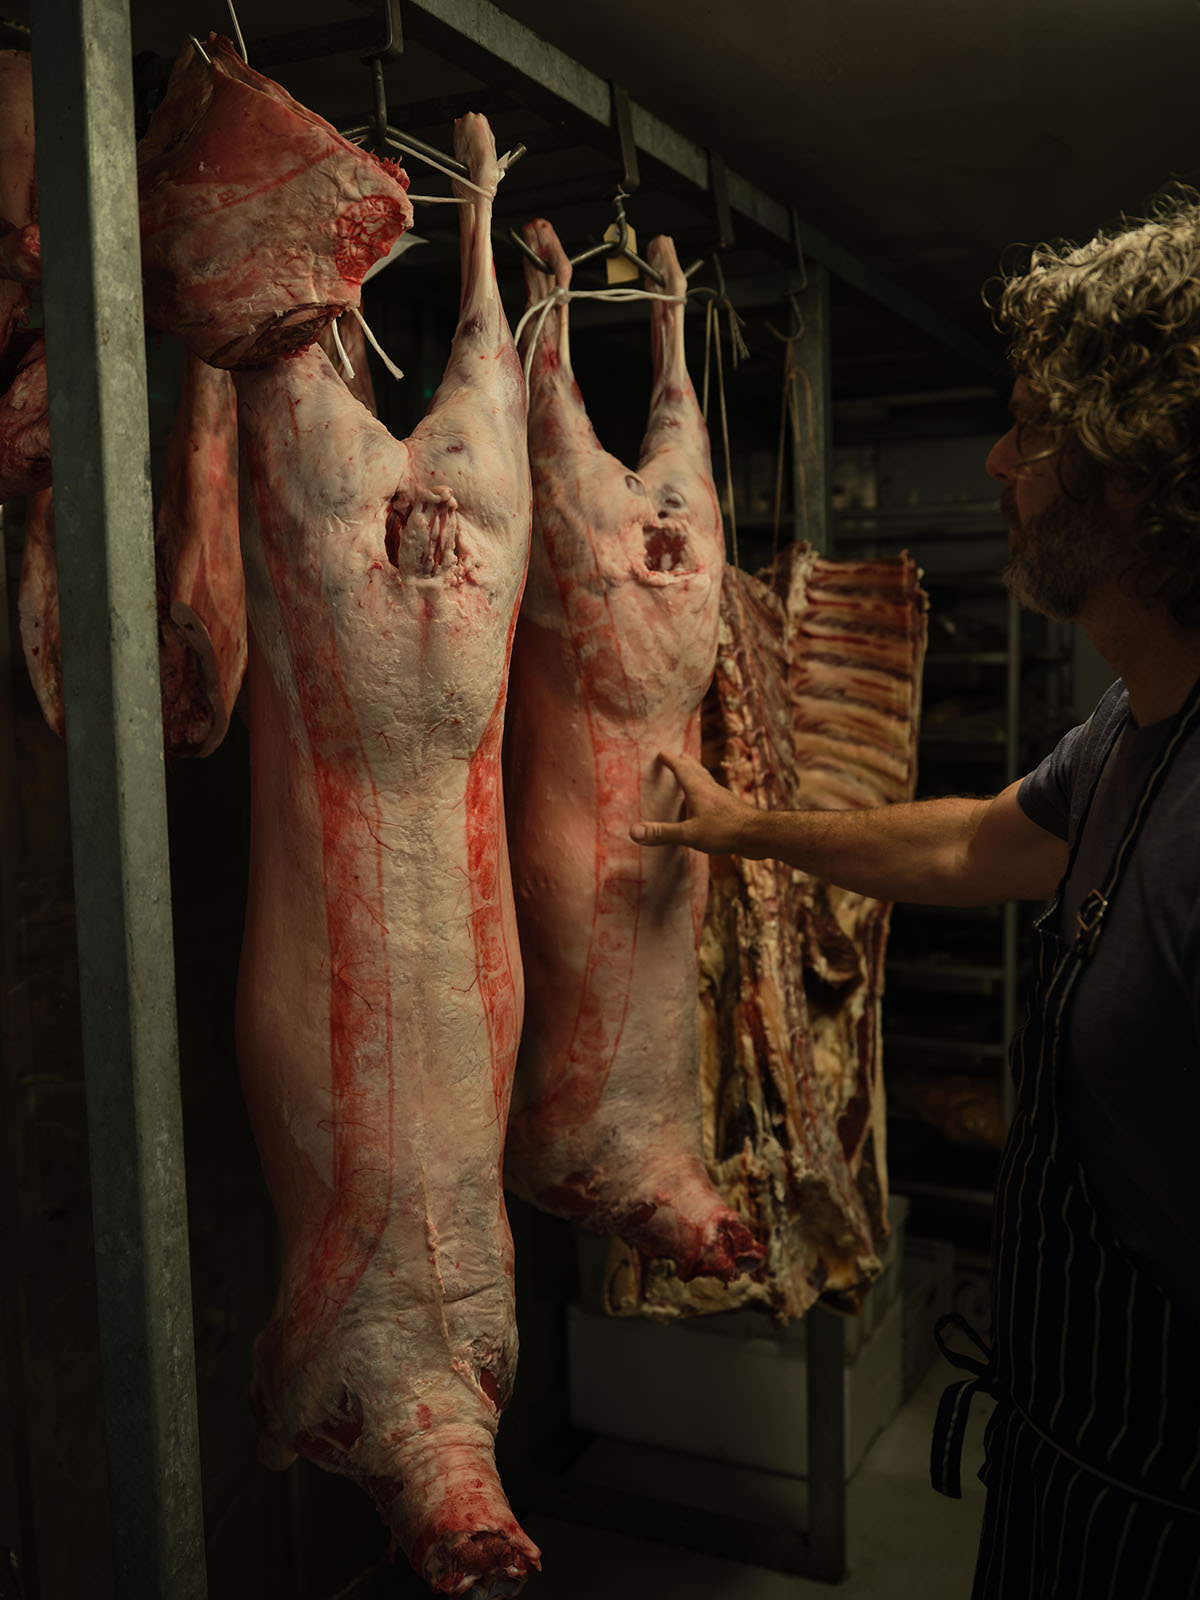 Gippsland lambs hanging in the cool room - Hogget Kitchen has never used boxed meat.